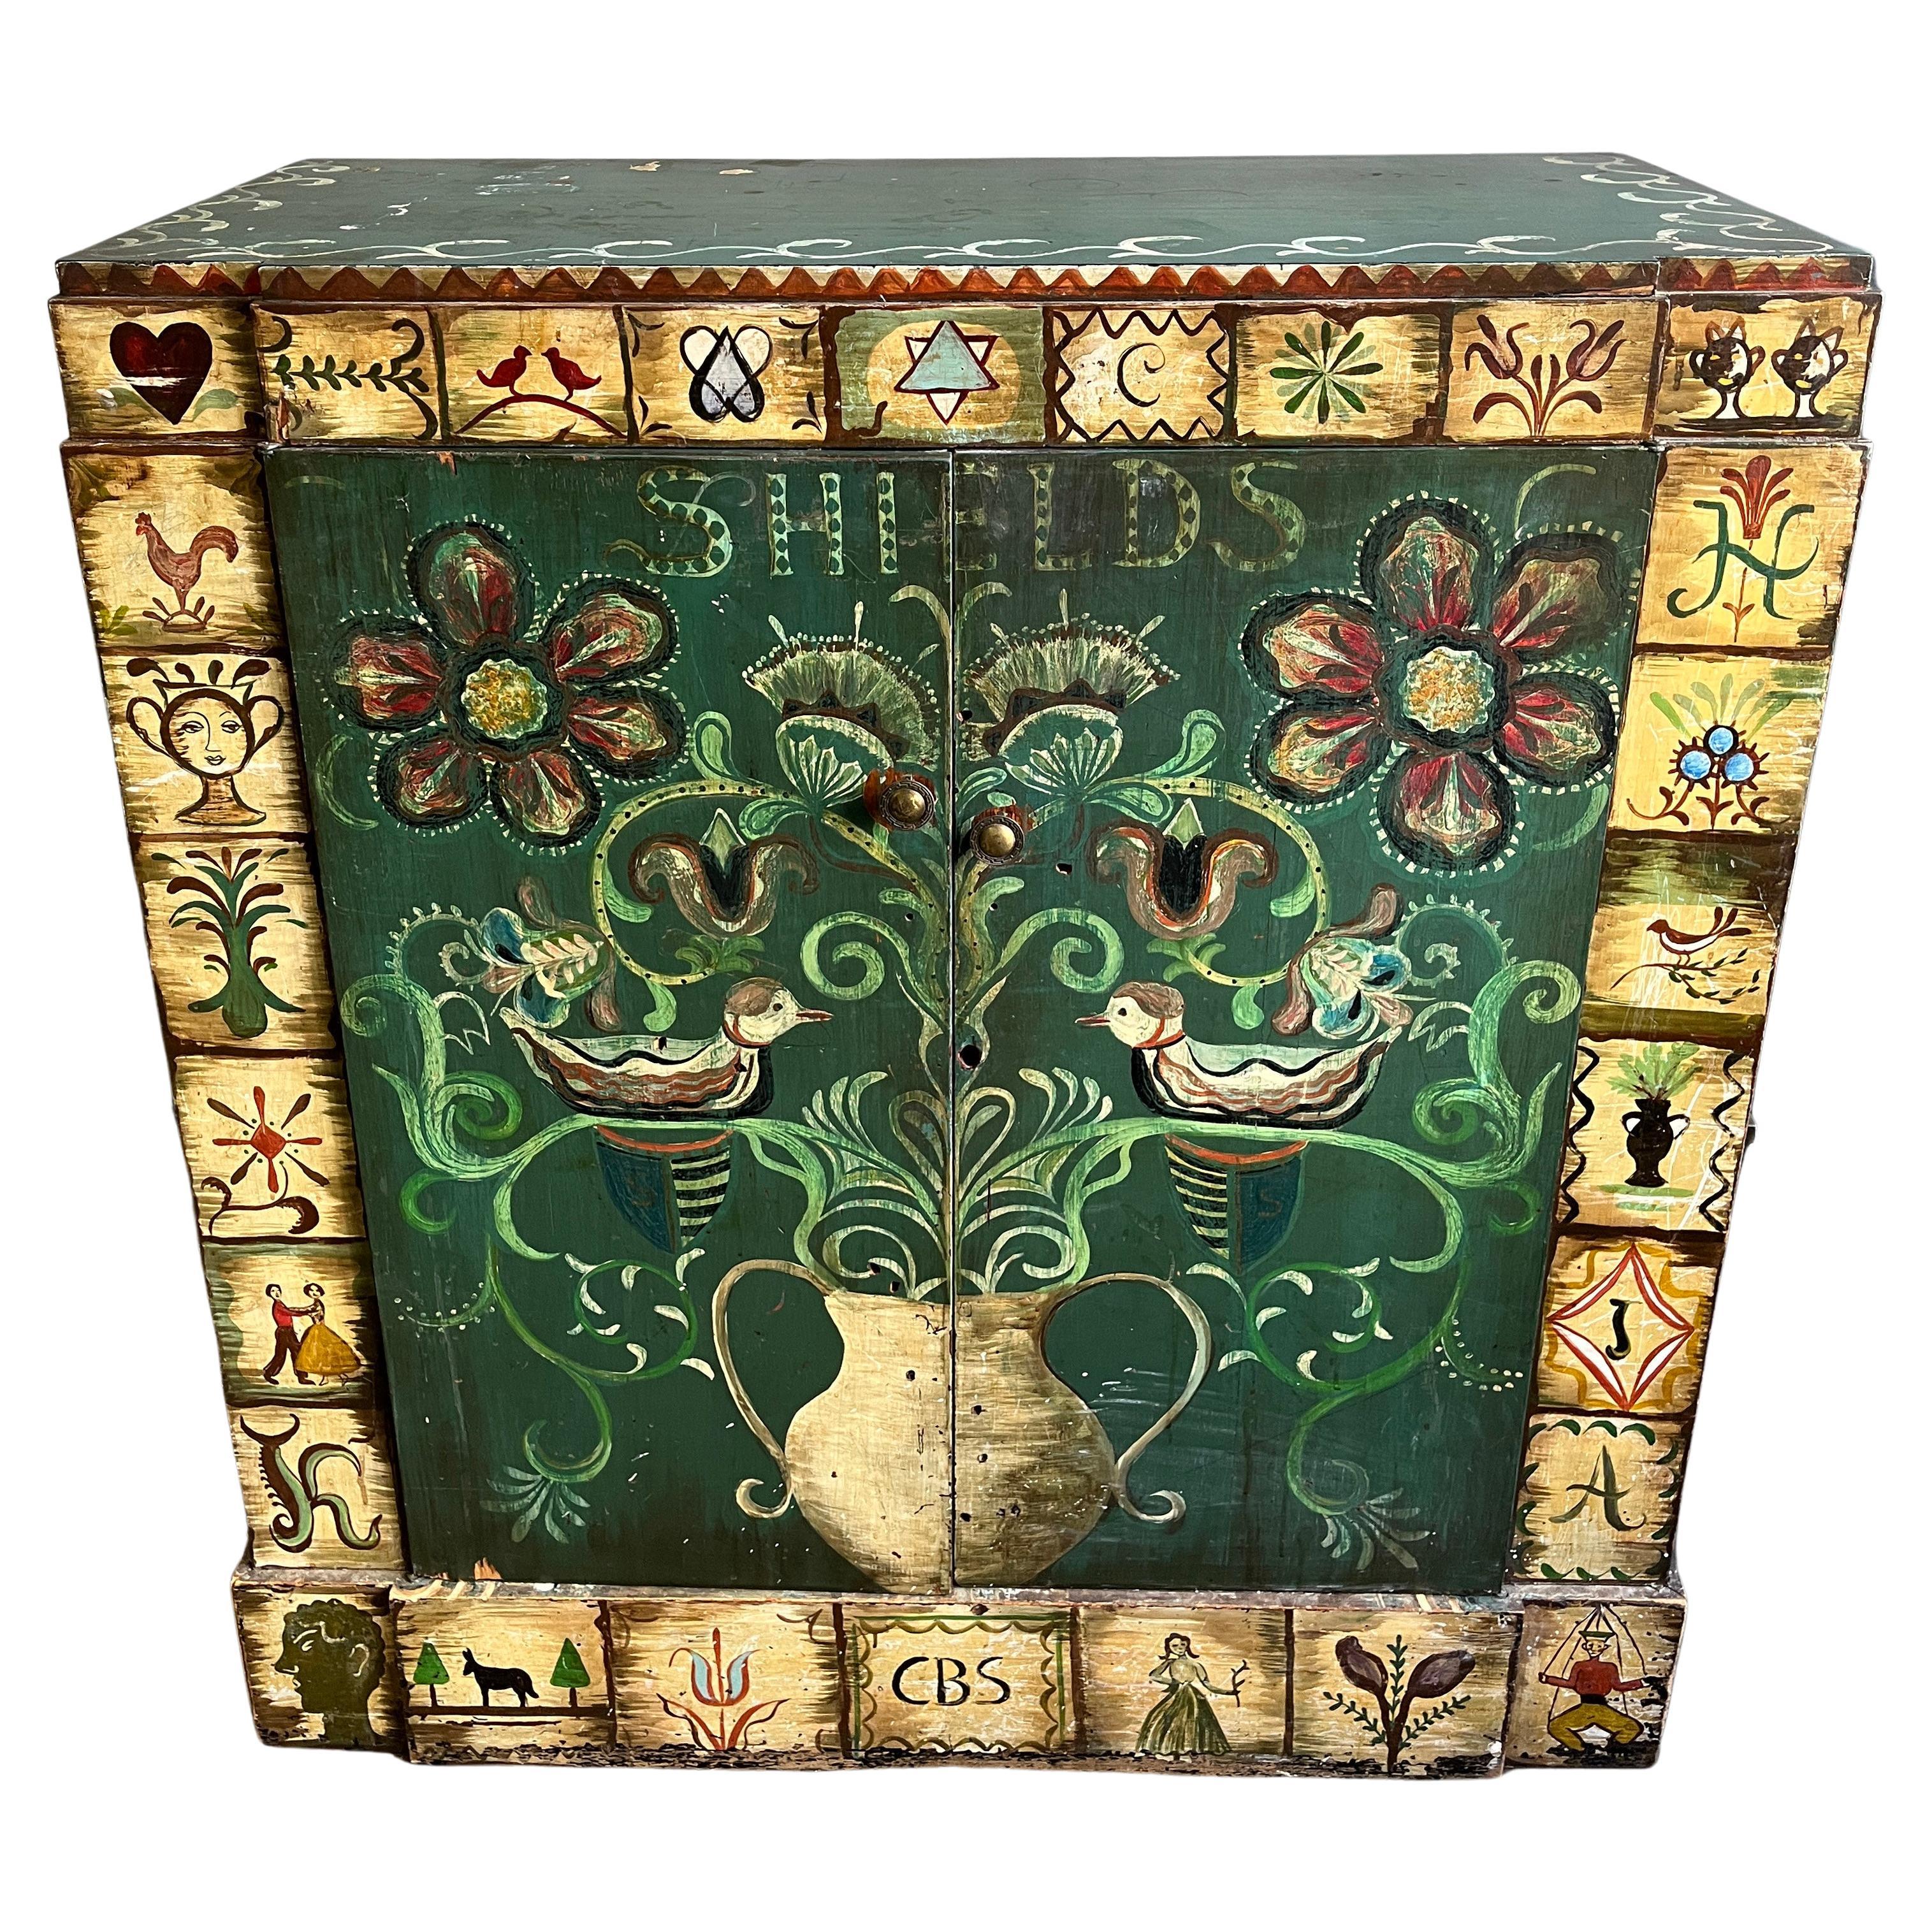 This beautiful hand painted wedding cabinet hand constructed by the Shield family. This turn of the century chest was lovingly painted with beautiful imagery. Throughout the years, this piece has been reworked and modified as evident by an